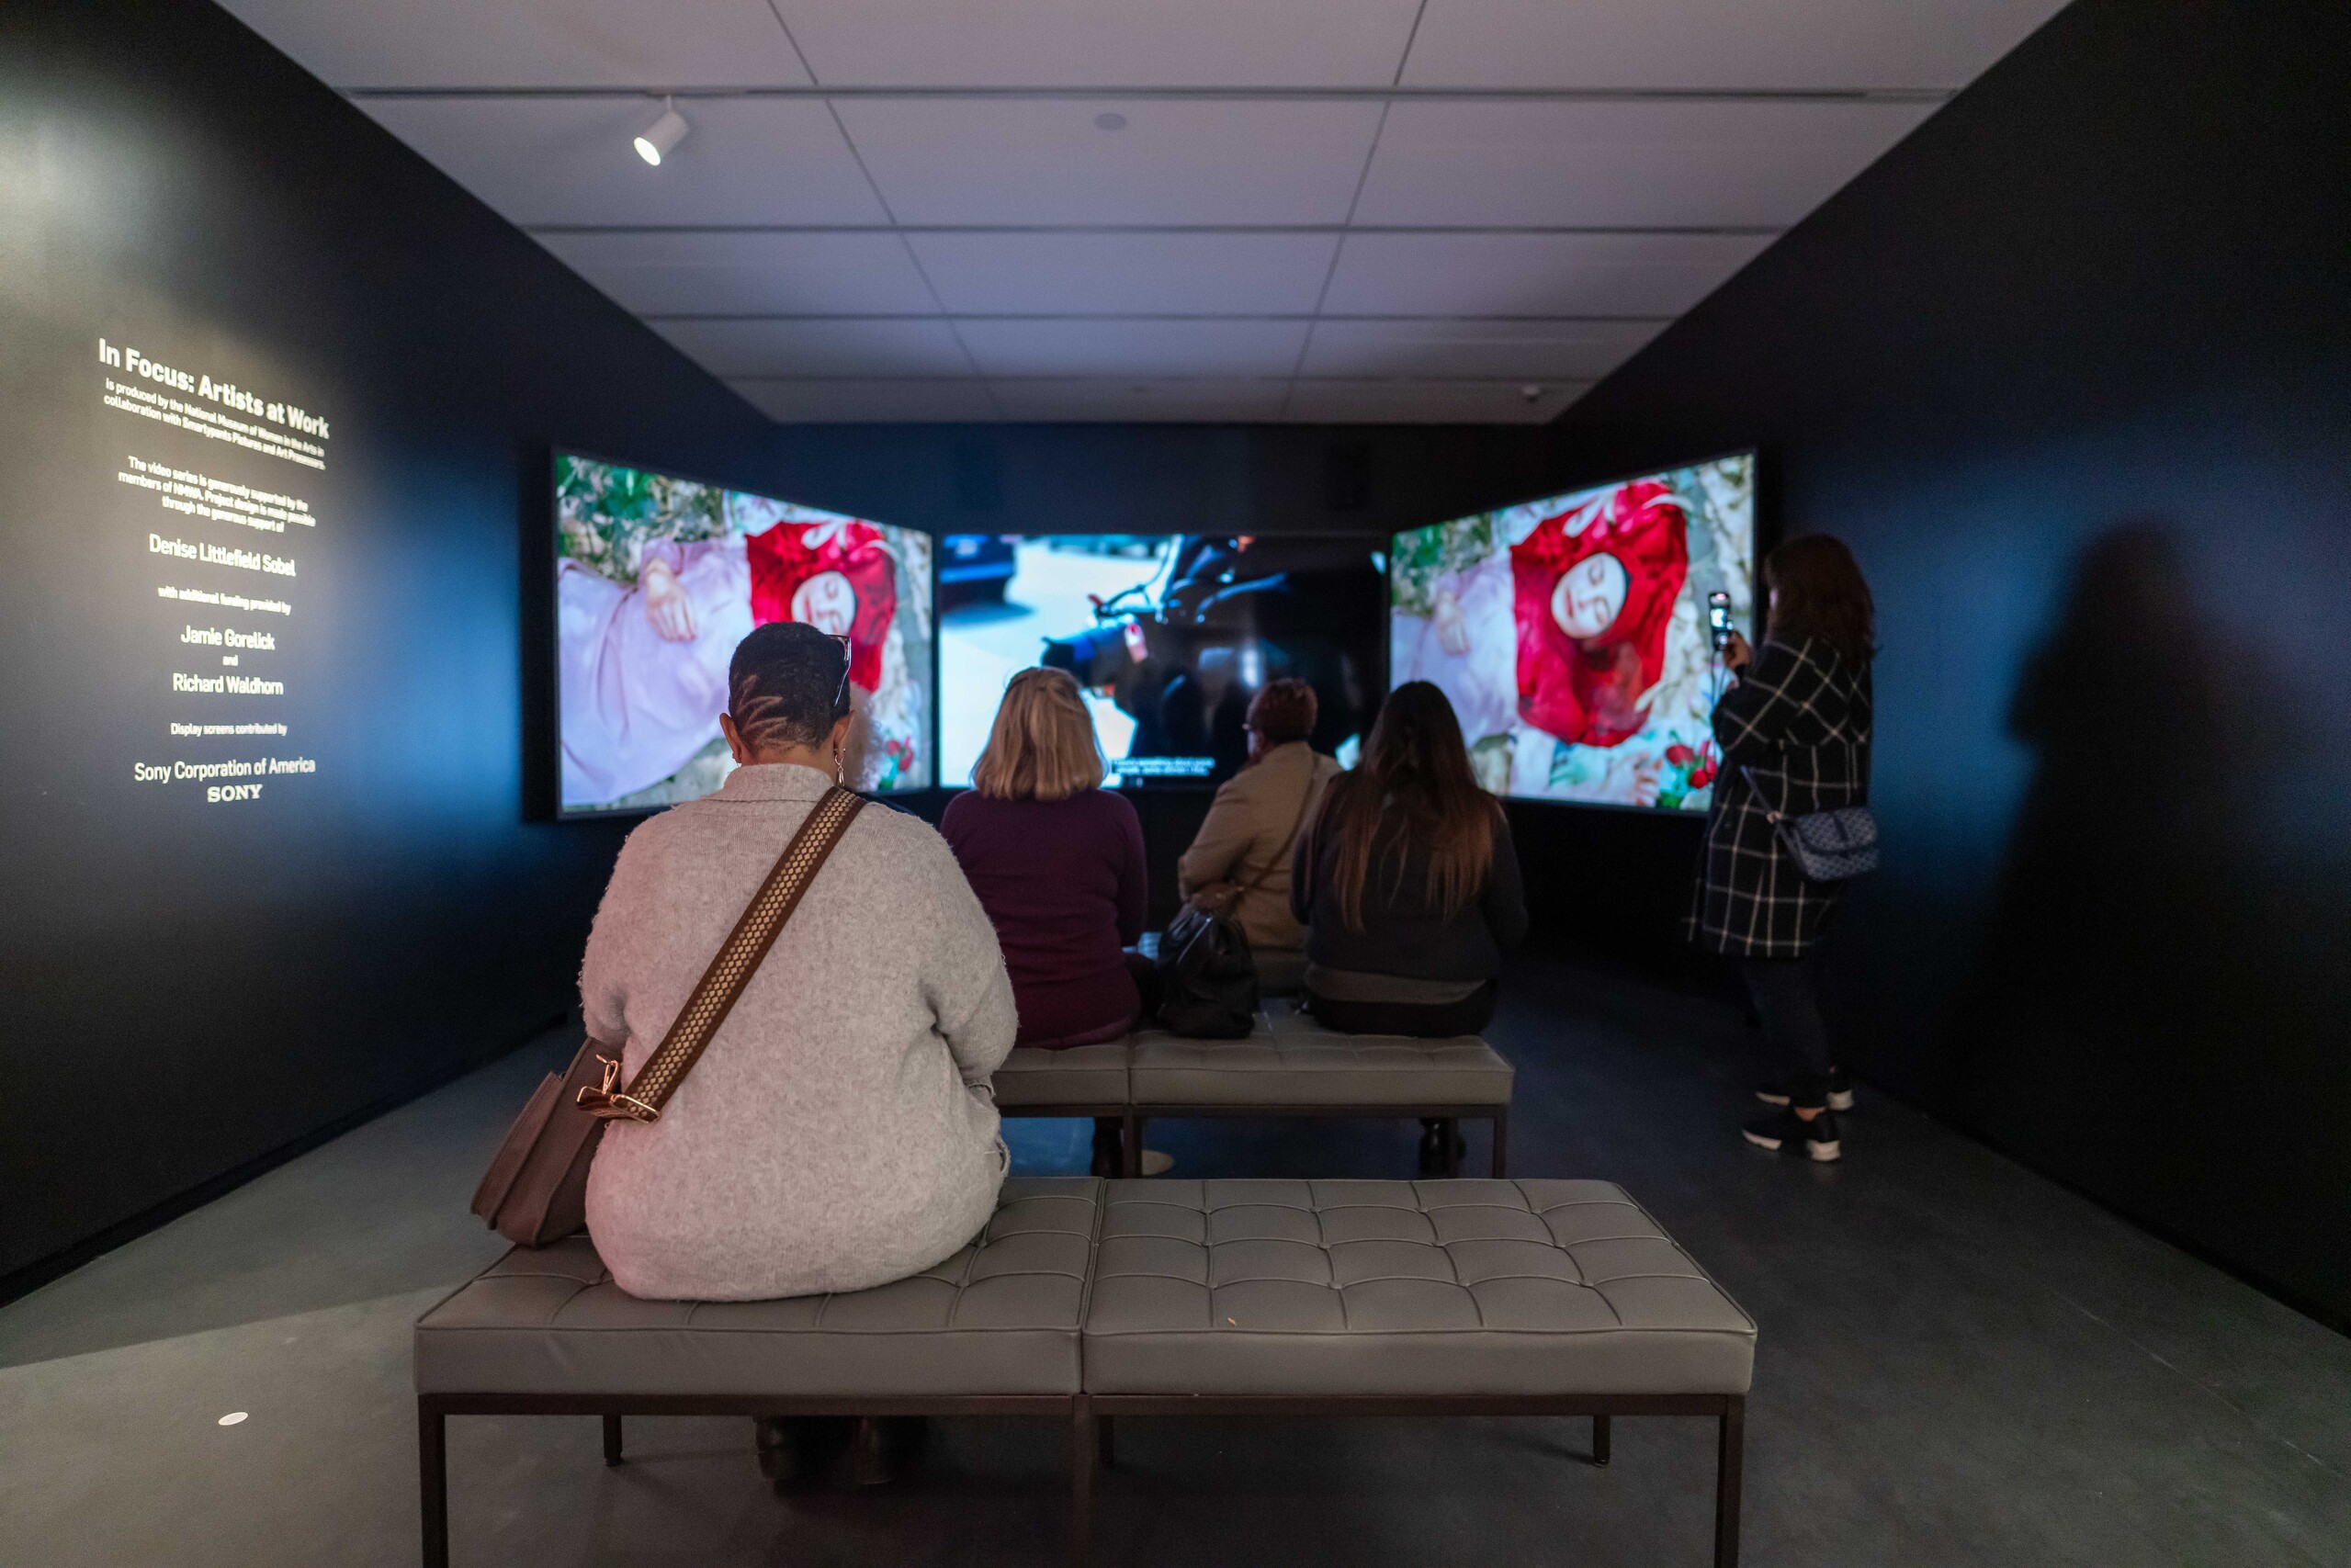 Several people are sitting in a dark room in front of three screens. There is a woman in a bright red headscarf lying on grass on the two outer screens. On the dark left wall, it says in big white letters: "In Focus: Artists at Work."